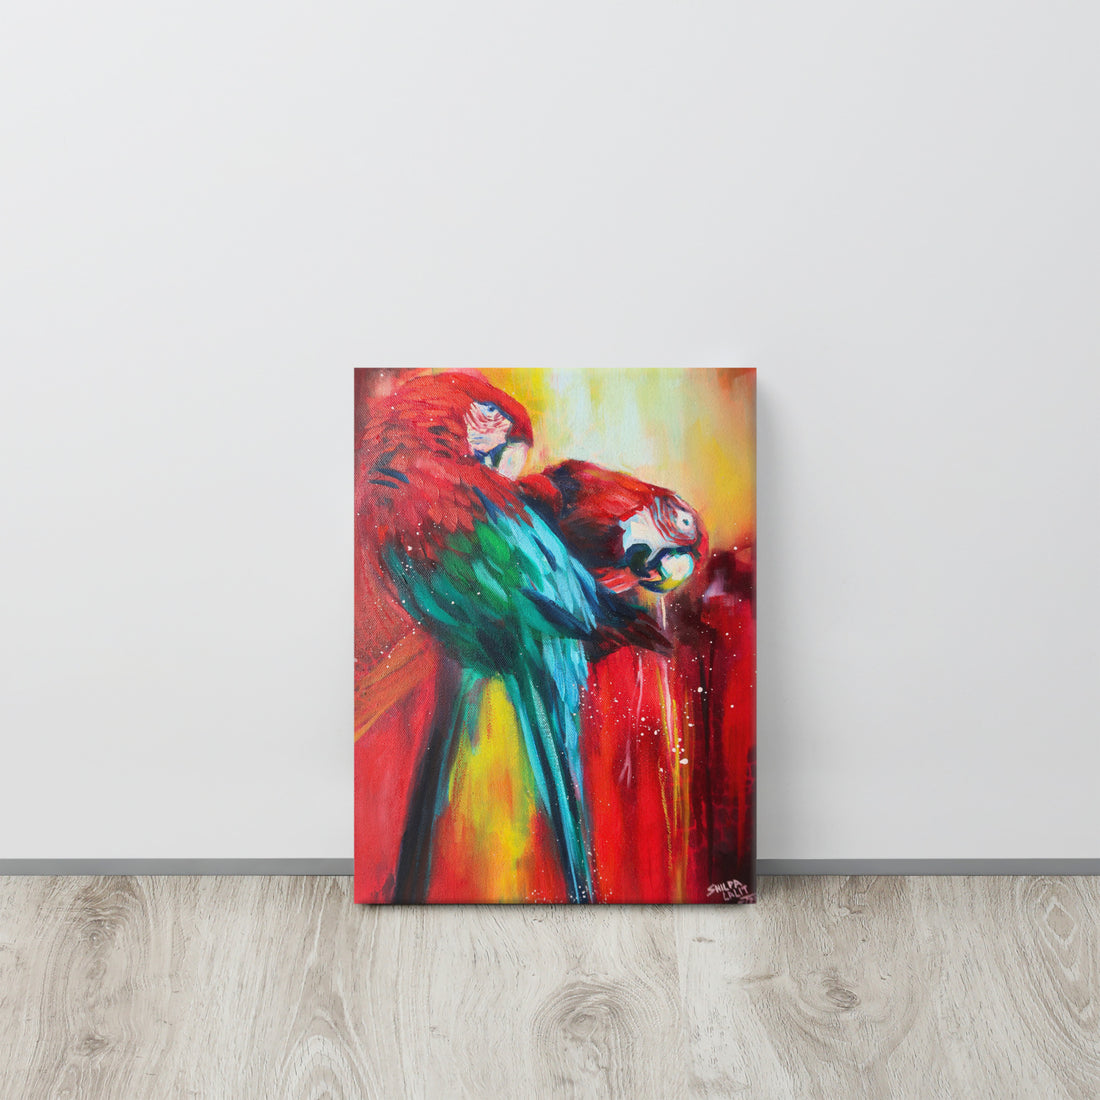 CANVAS PRINT :- “ COVER ME IN LOVE “